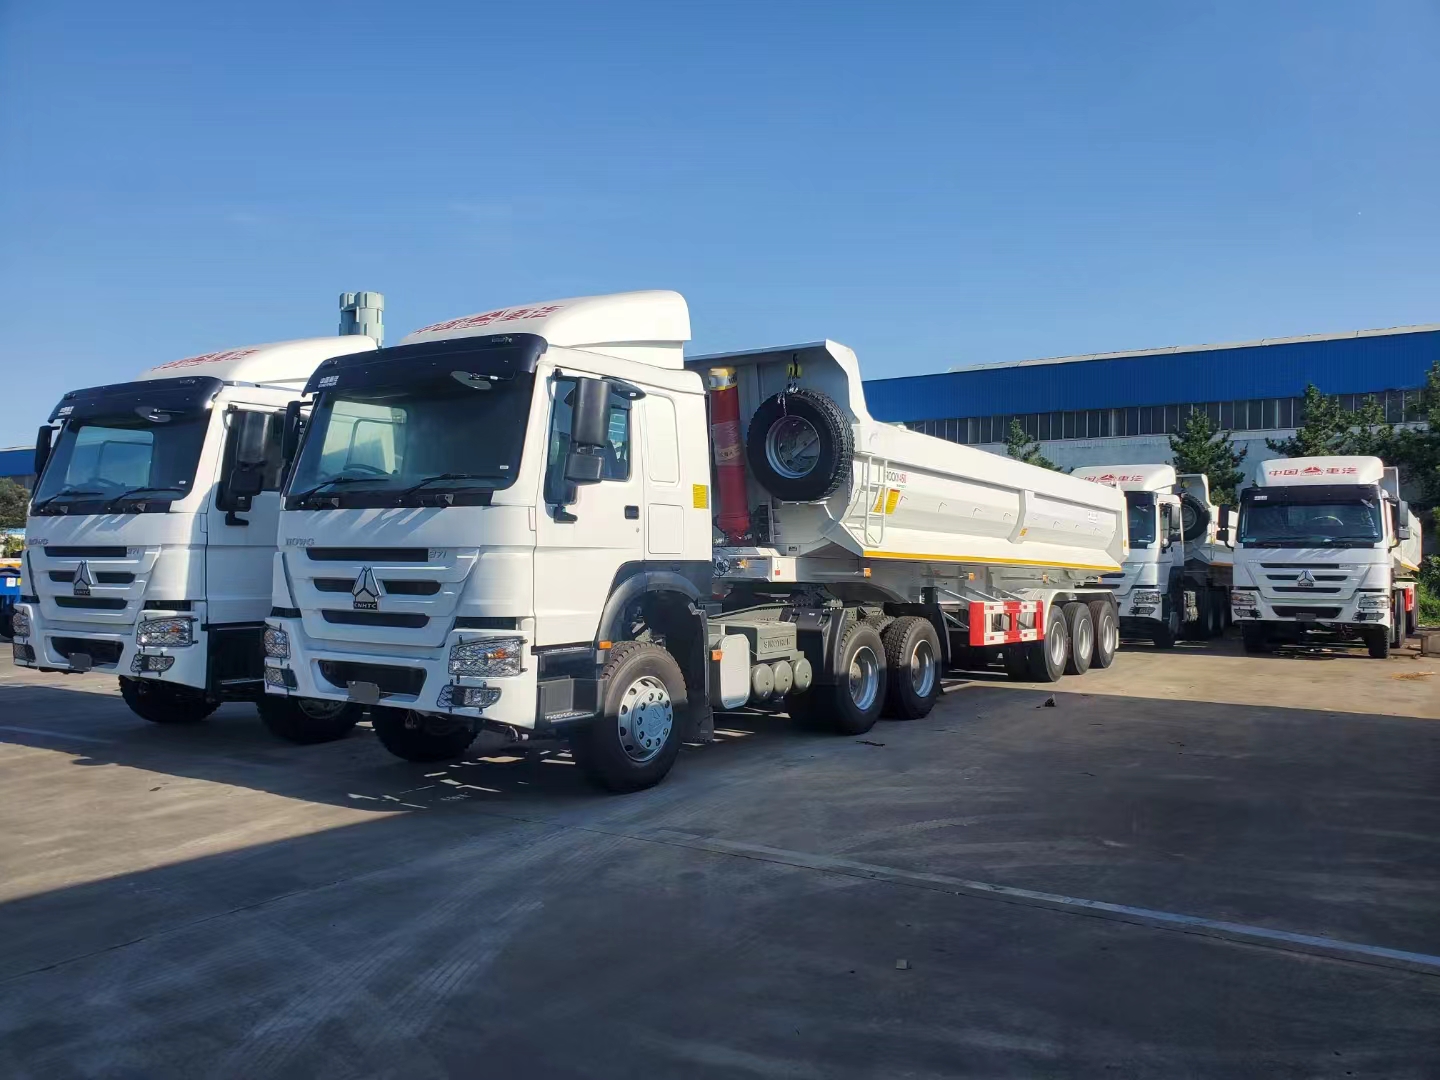 Sinotruk howo truck tractor and tipper semi trailers are ready for the shipment